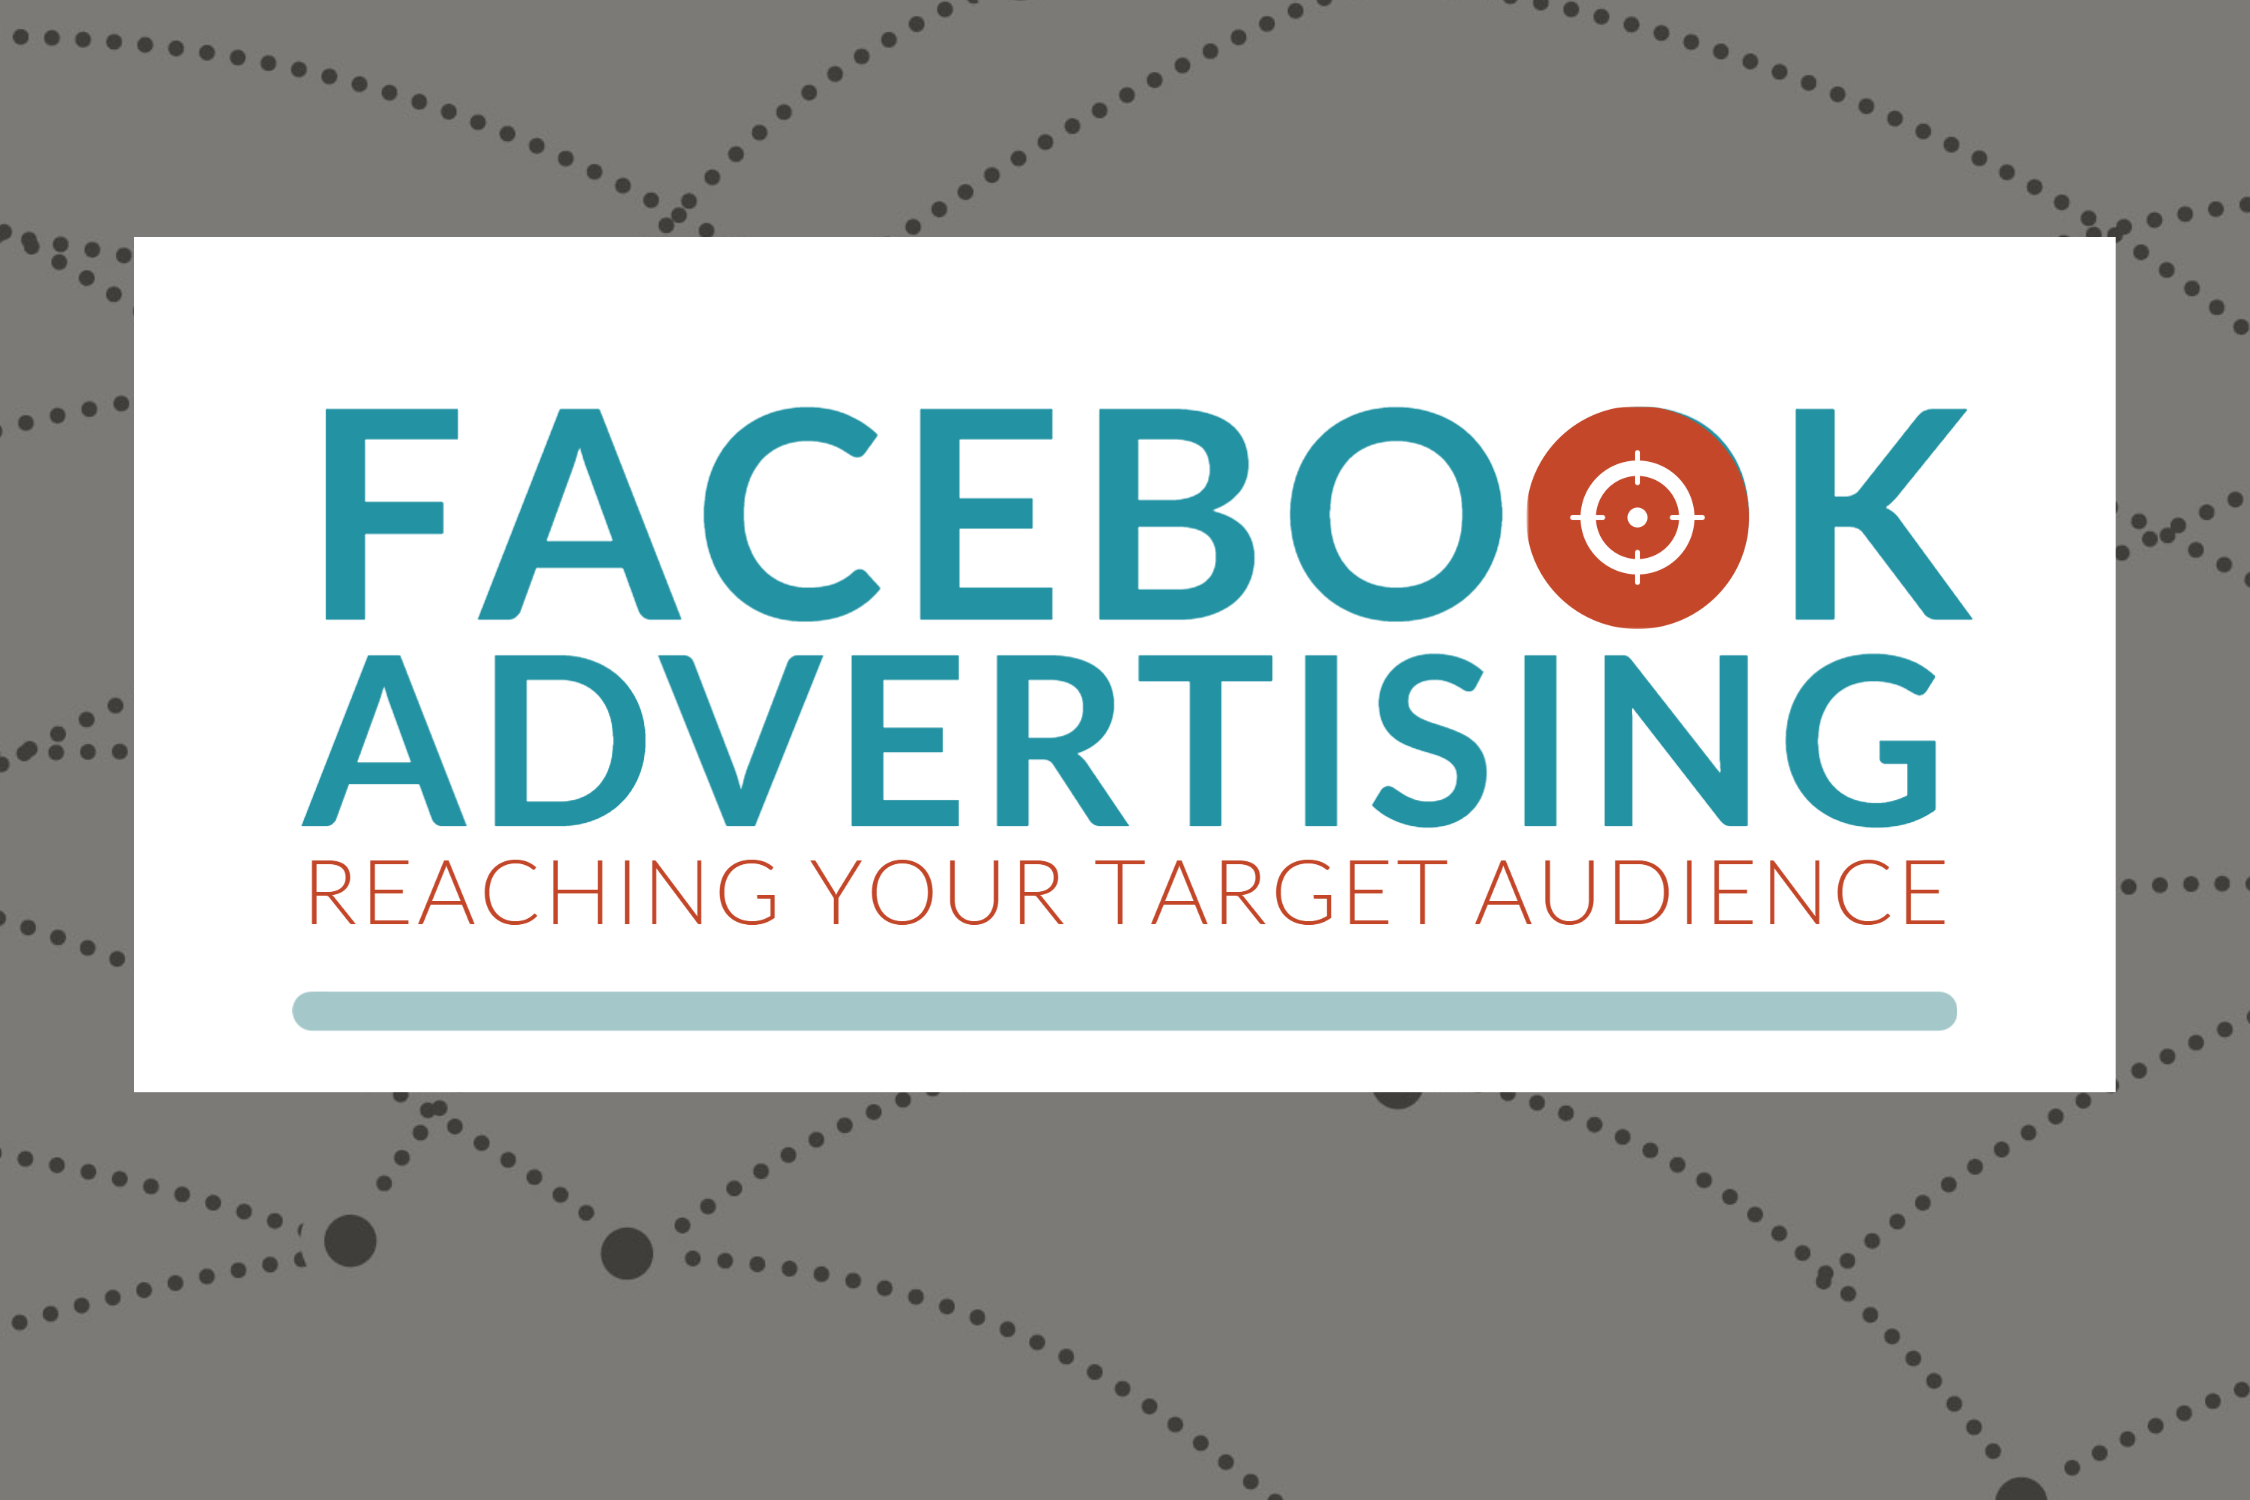 Are Your Facebook Ads Hitting The Mark?